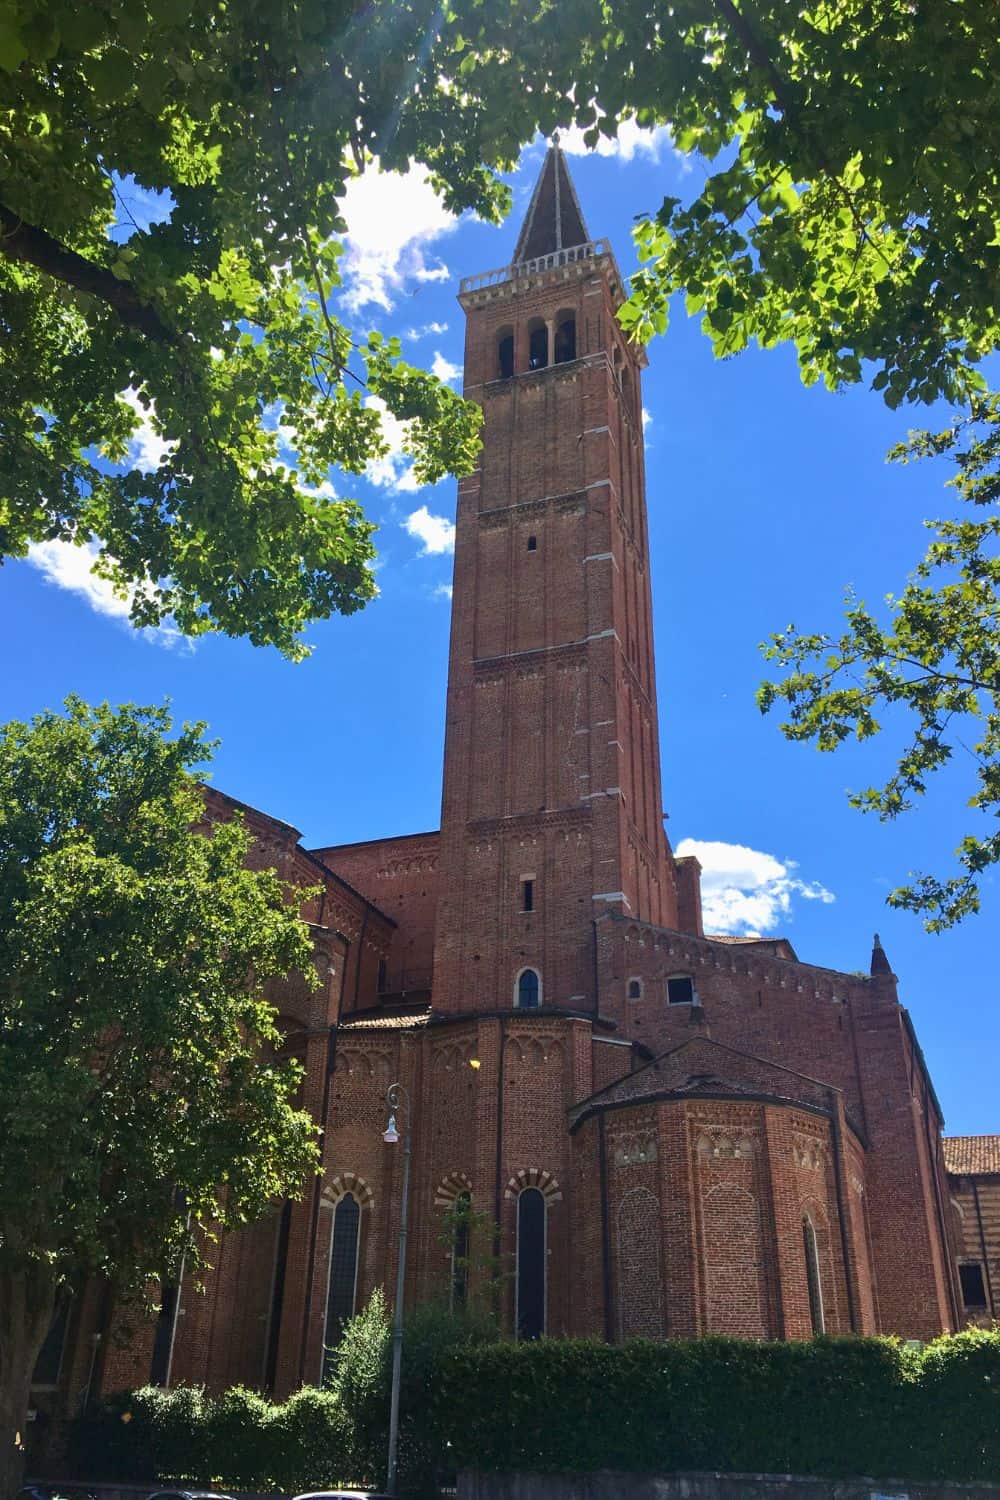 A red brick church on a sunny day with the lush green trees.